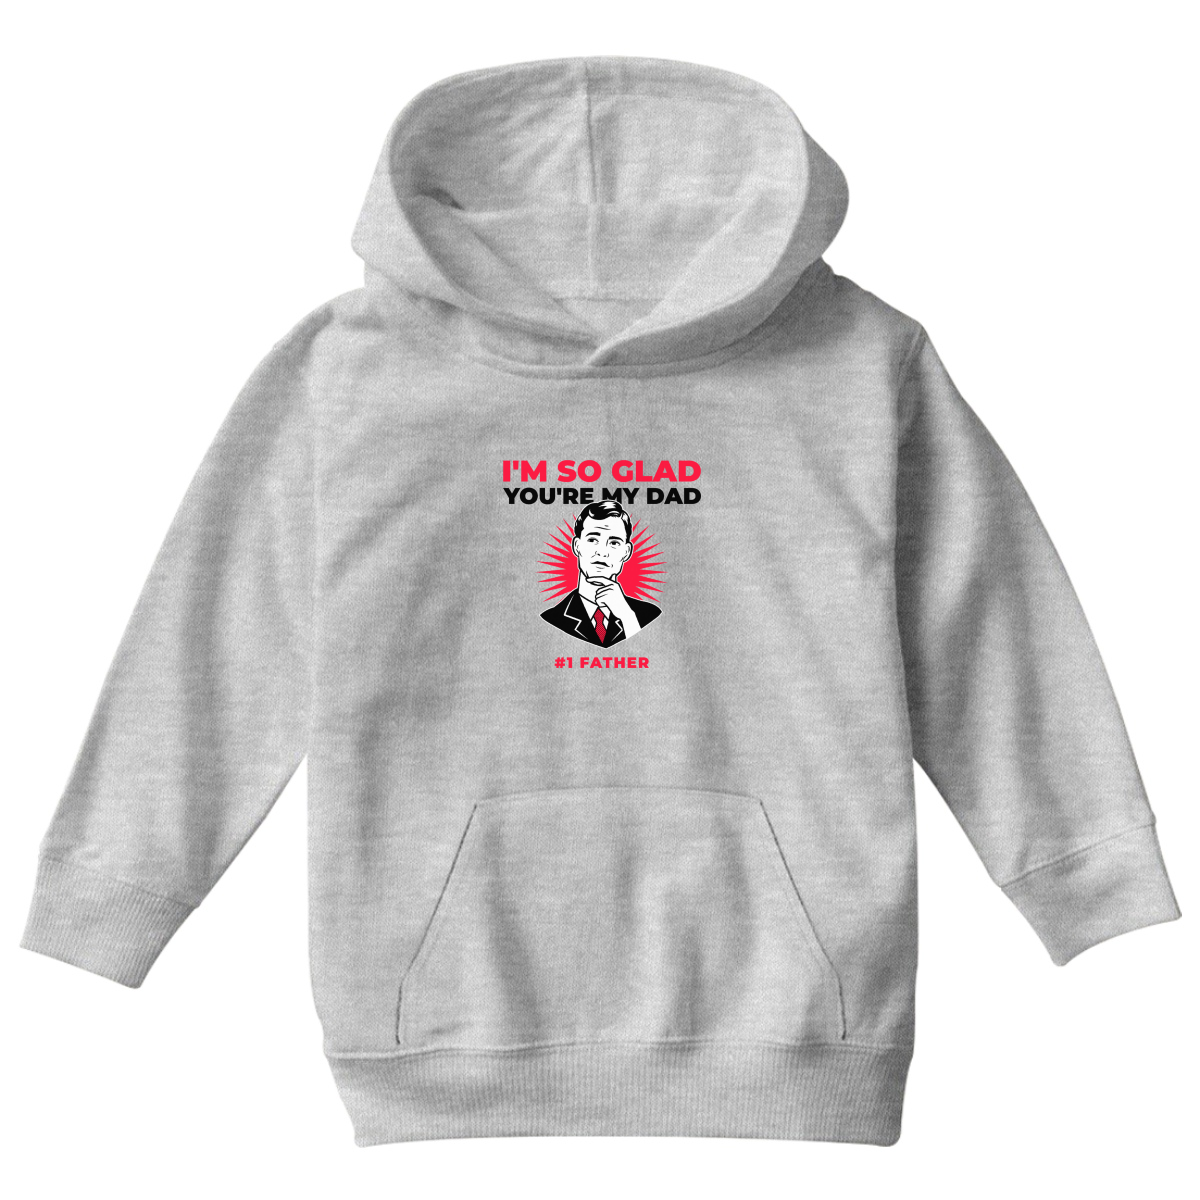 I'm so glad you are my dad Kids Hoodie | Gray